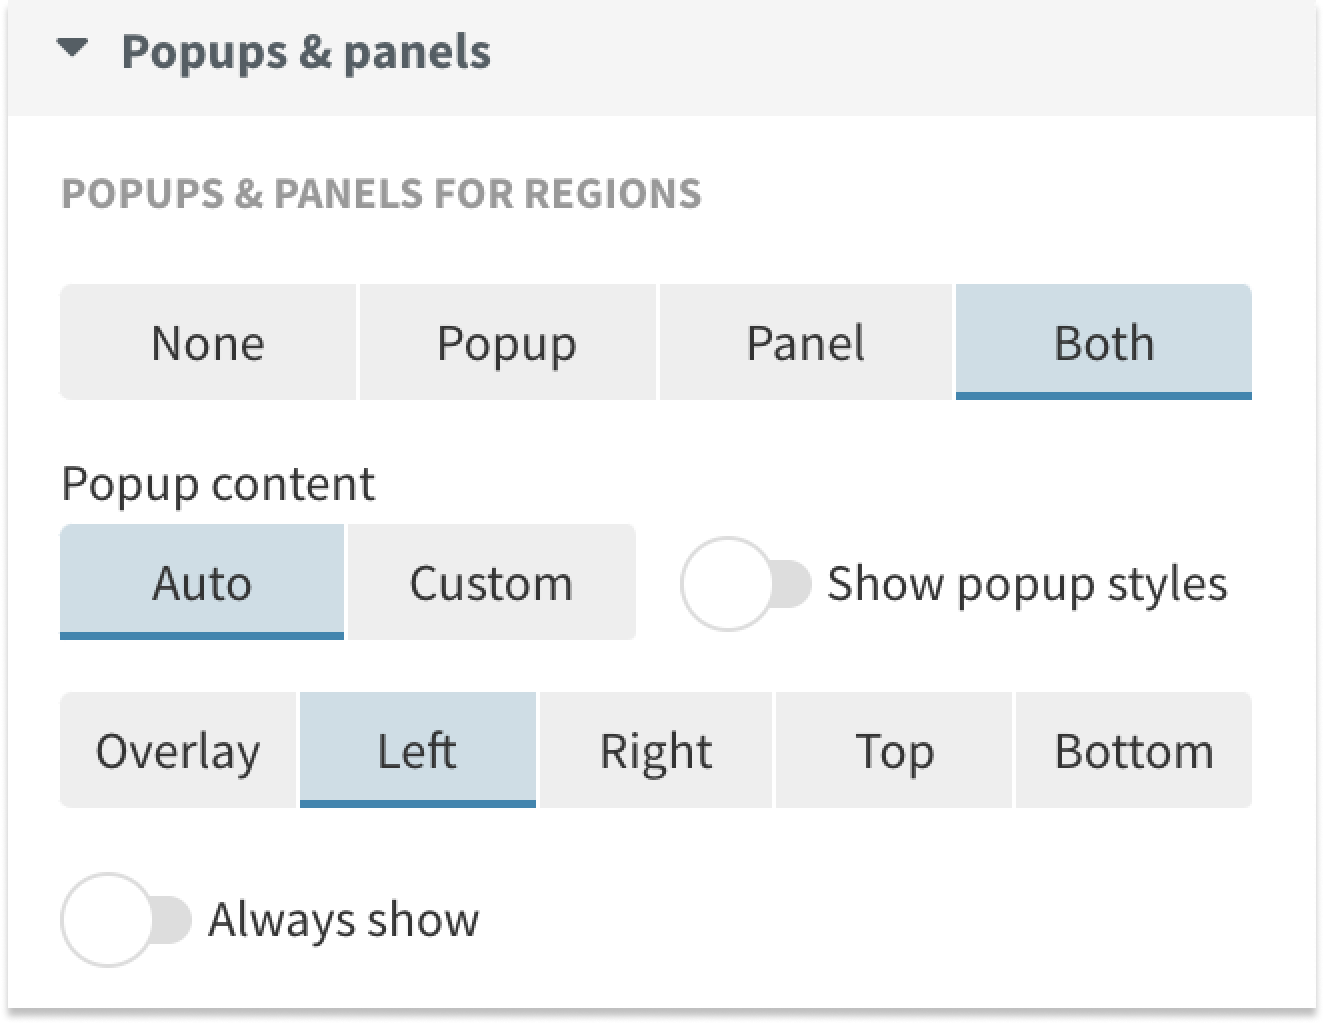 You can choose between four different options when configuring popups and panels